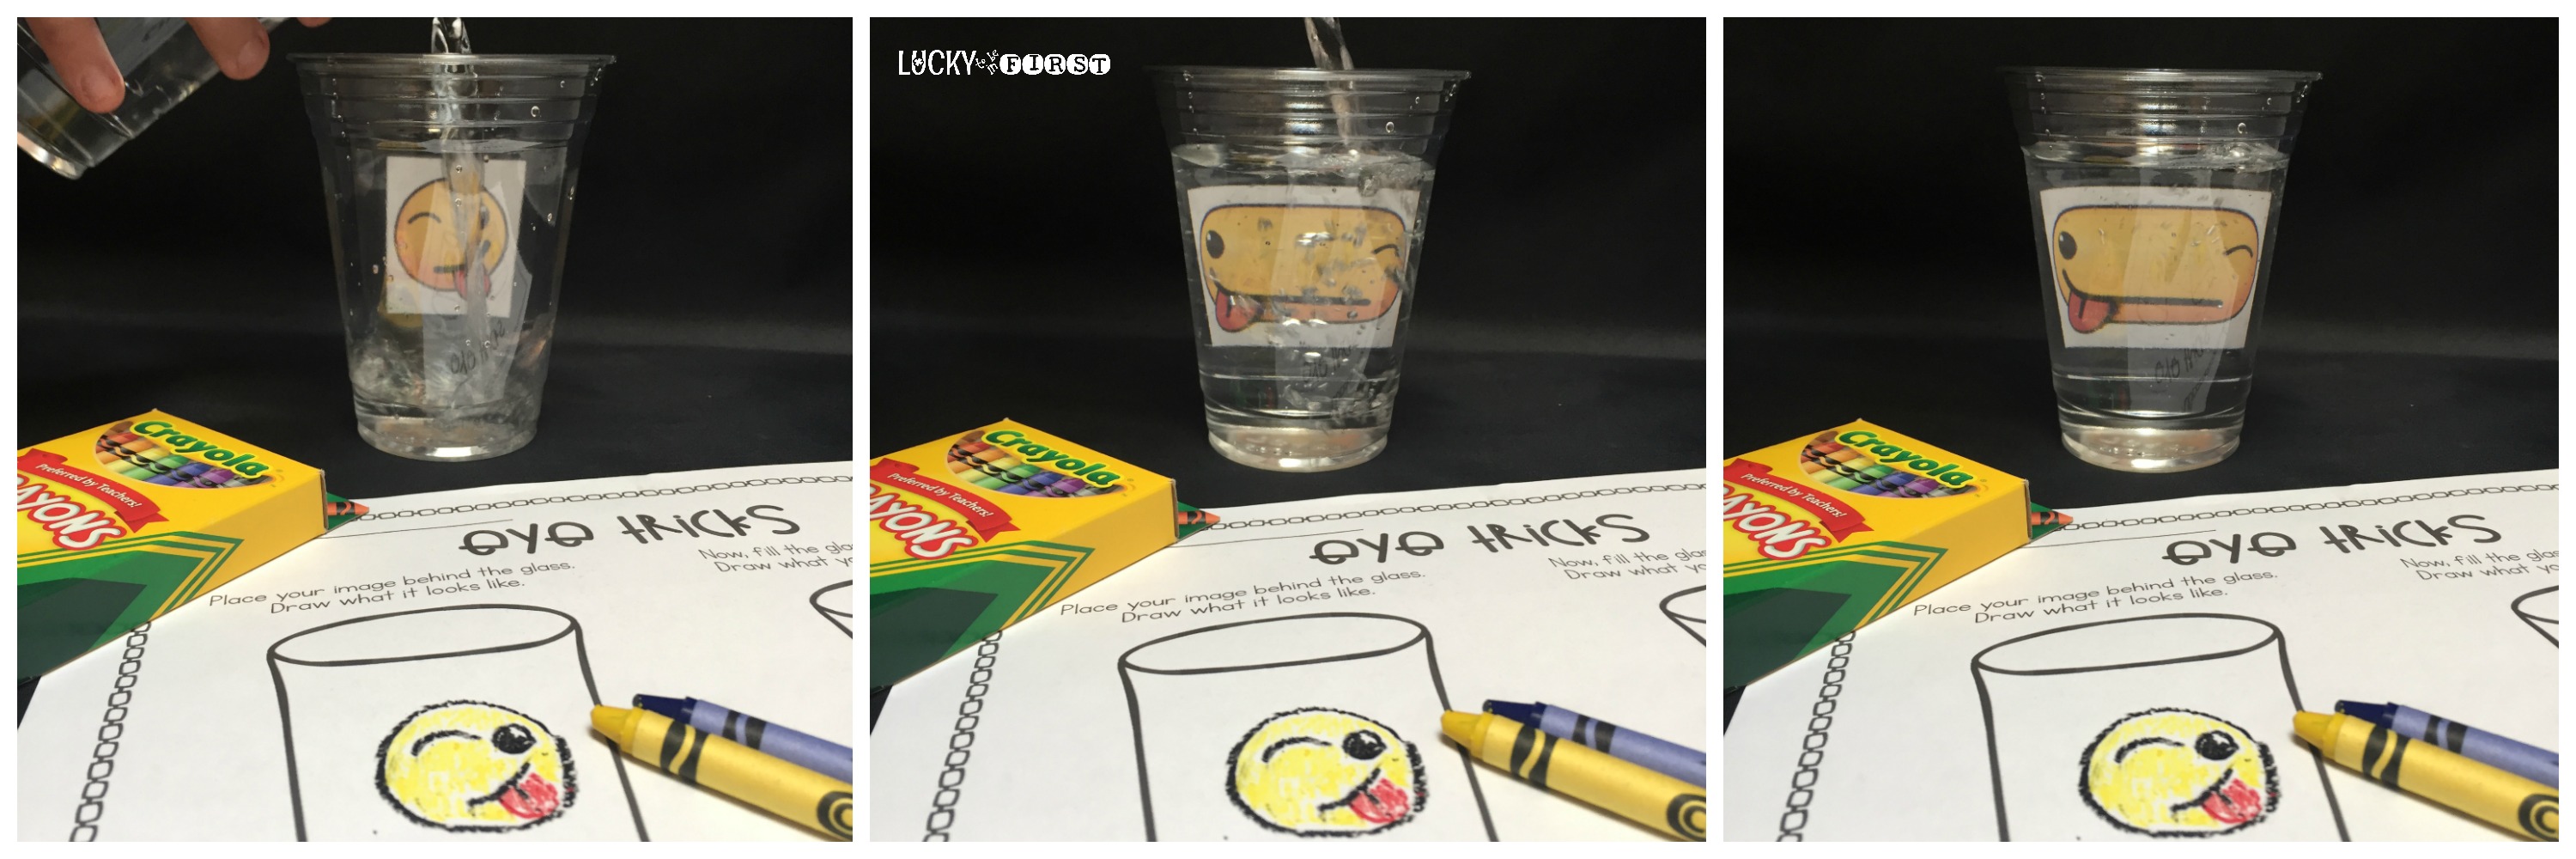 fun activity with water and cups to show how light reacts | Lucky Learning with Molly Lynch 